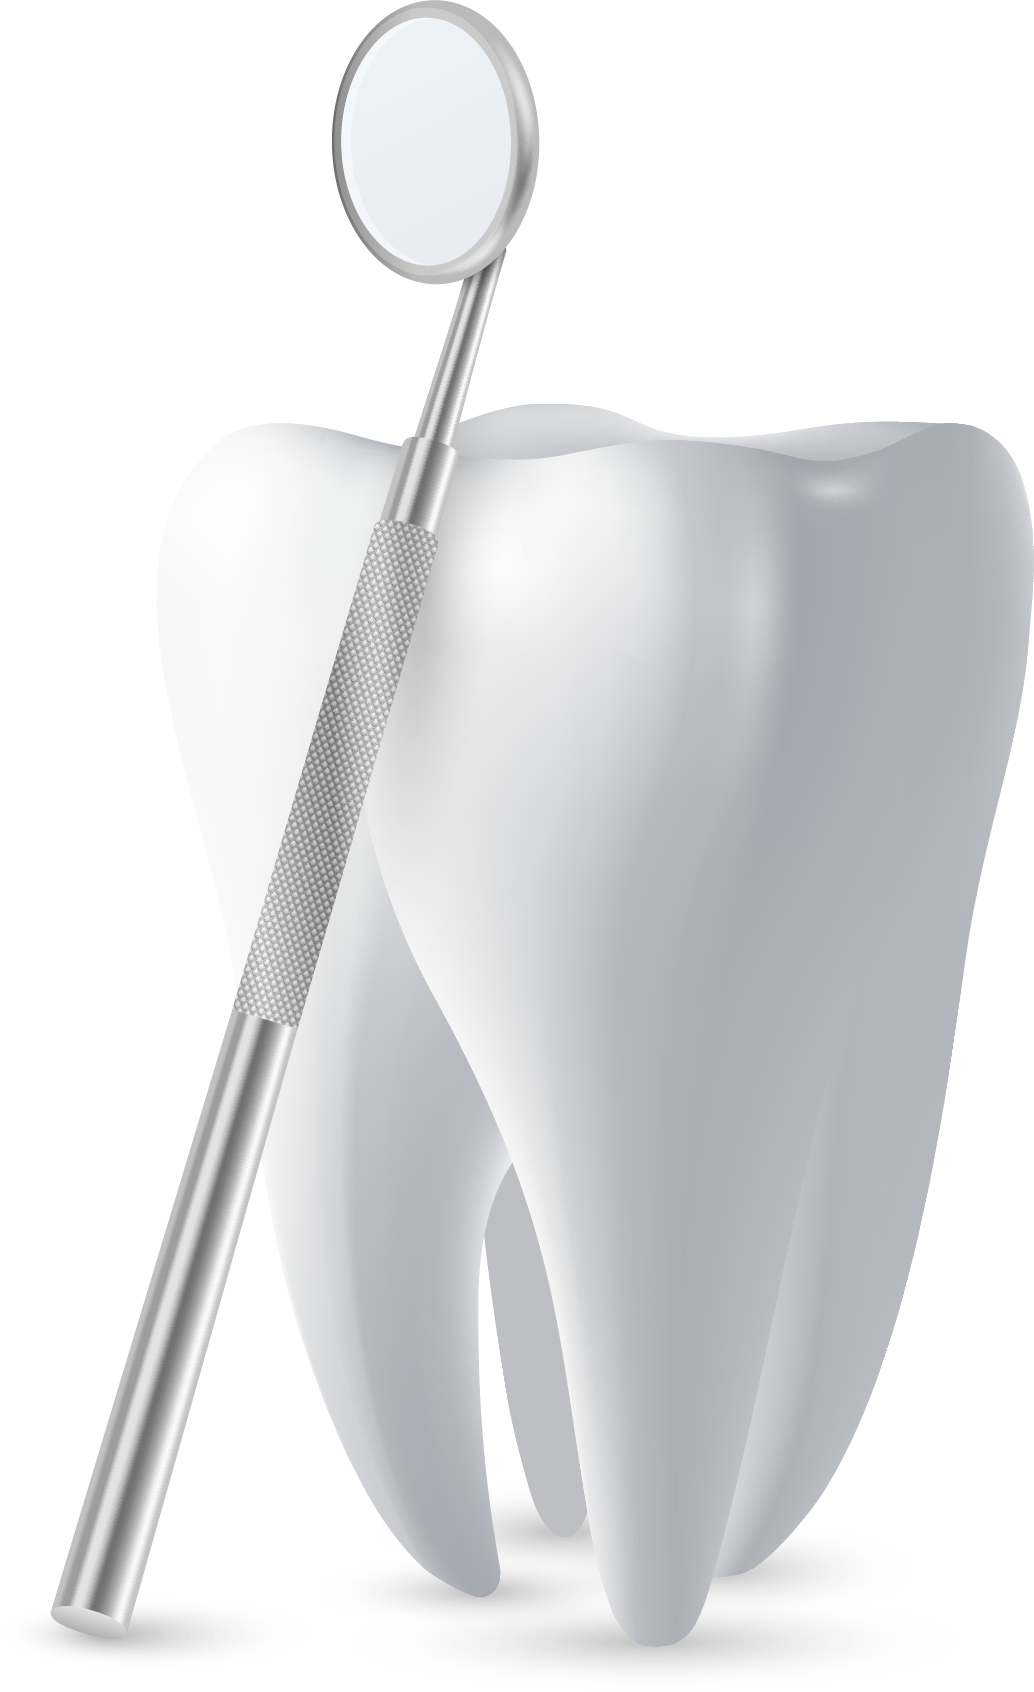 Tooth with Dentistry Equipment 4 - Charlotte, NC - Northlake Dentistry